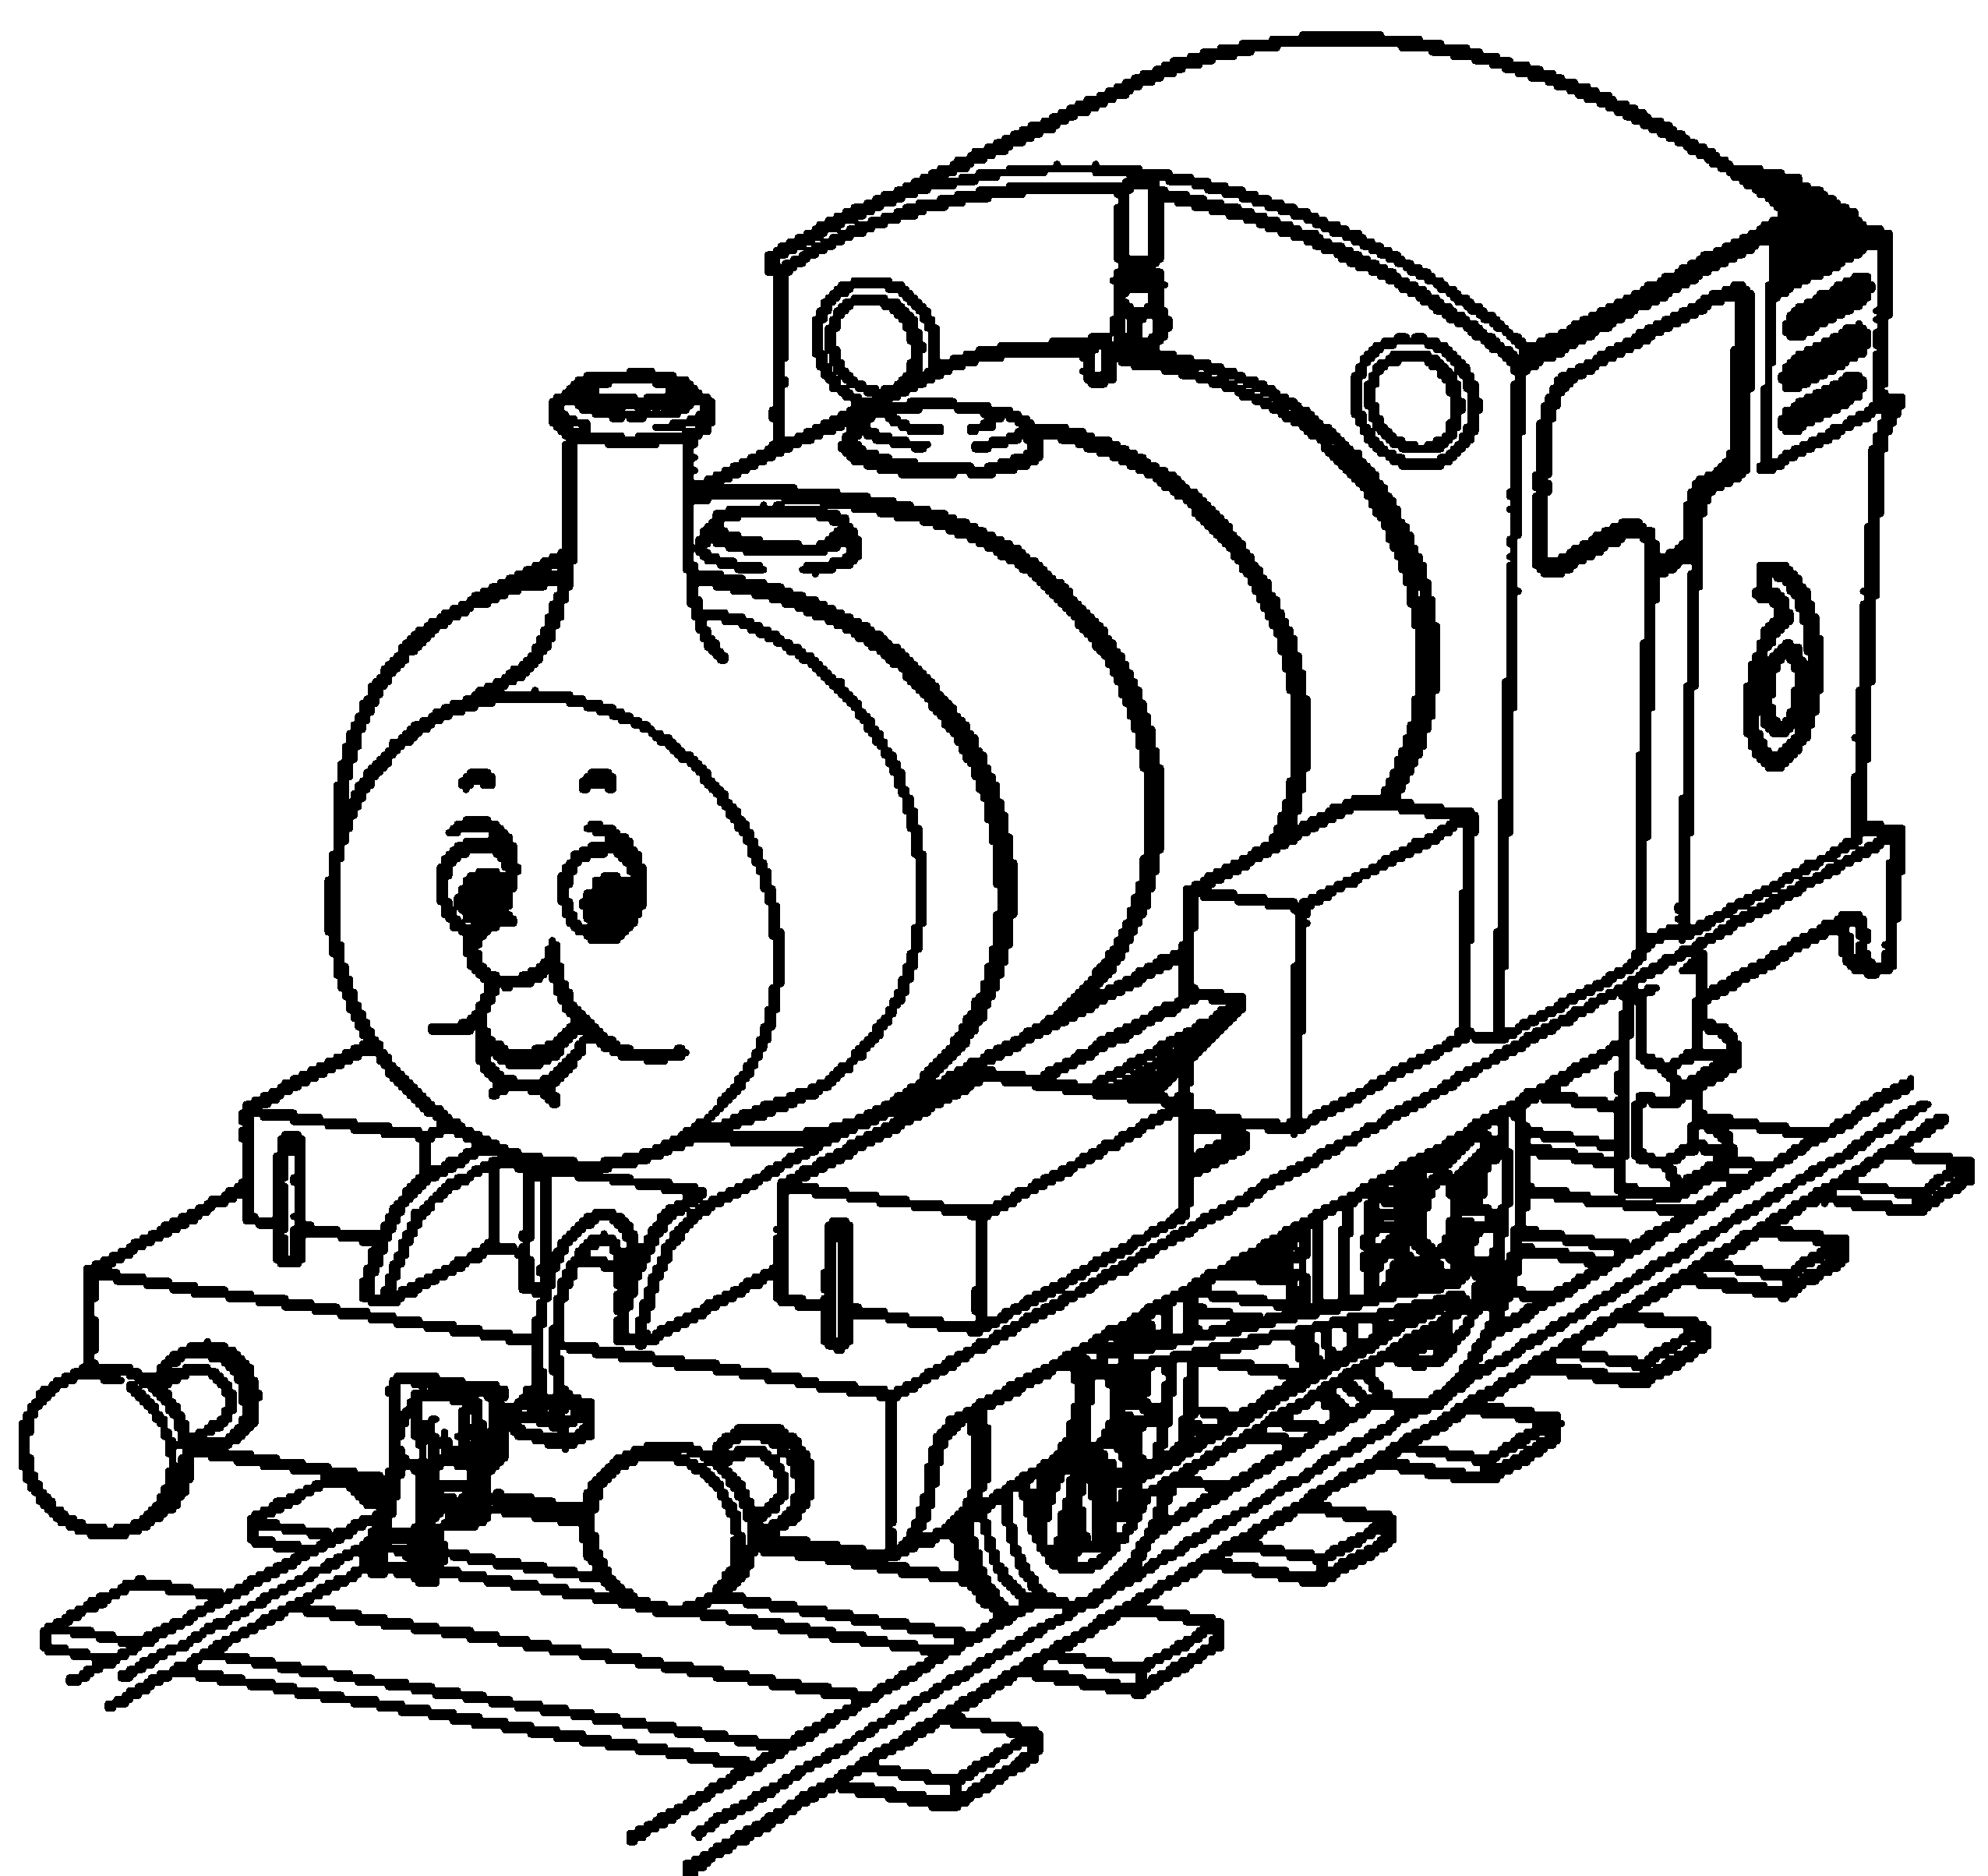 Print & Download - Thomas the Train Theme Coloring Pages